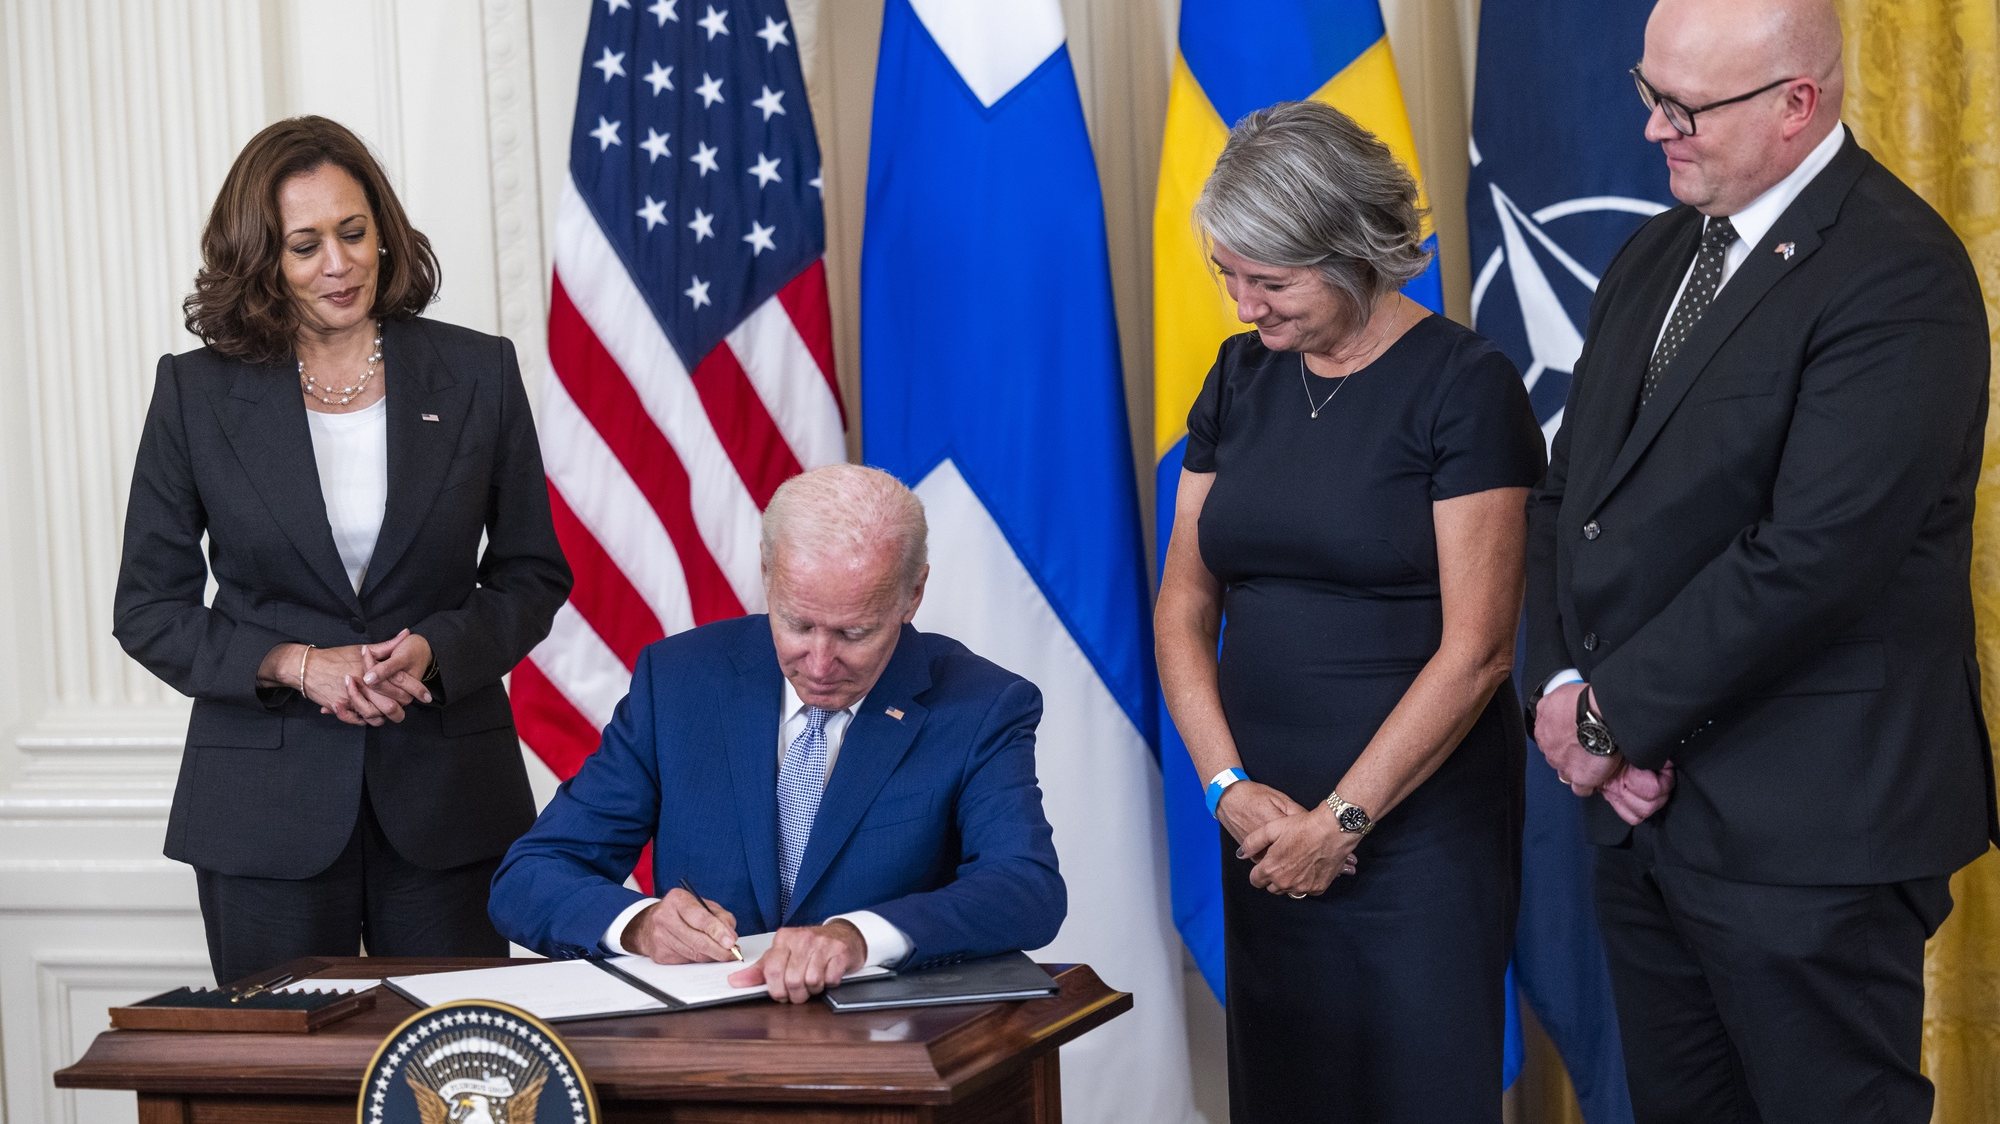 epa10113031 US President Joe Biden (C-L), alongside Vice President Kamala Harris (L), Swedish Ambassador to the US Karin Ulrika Olofsdotter (C-R), and Finnish Ambassador to the US Mikko Hautala (R), signs the Instruments of Ratification for the Accession Protocols to the North Atlantic Treaty (NATO) for Finland and Sweden in the East Room of the White House in Washington, DC, USA, 09 August 2022. The two Nordic countries are seeking to join NATO following Russia&#039;s invasion of Ukraine.  EPA/JIM LO SCALZO